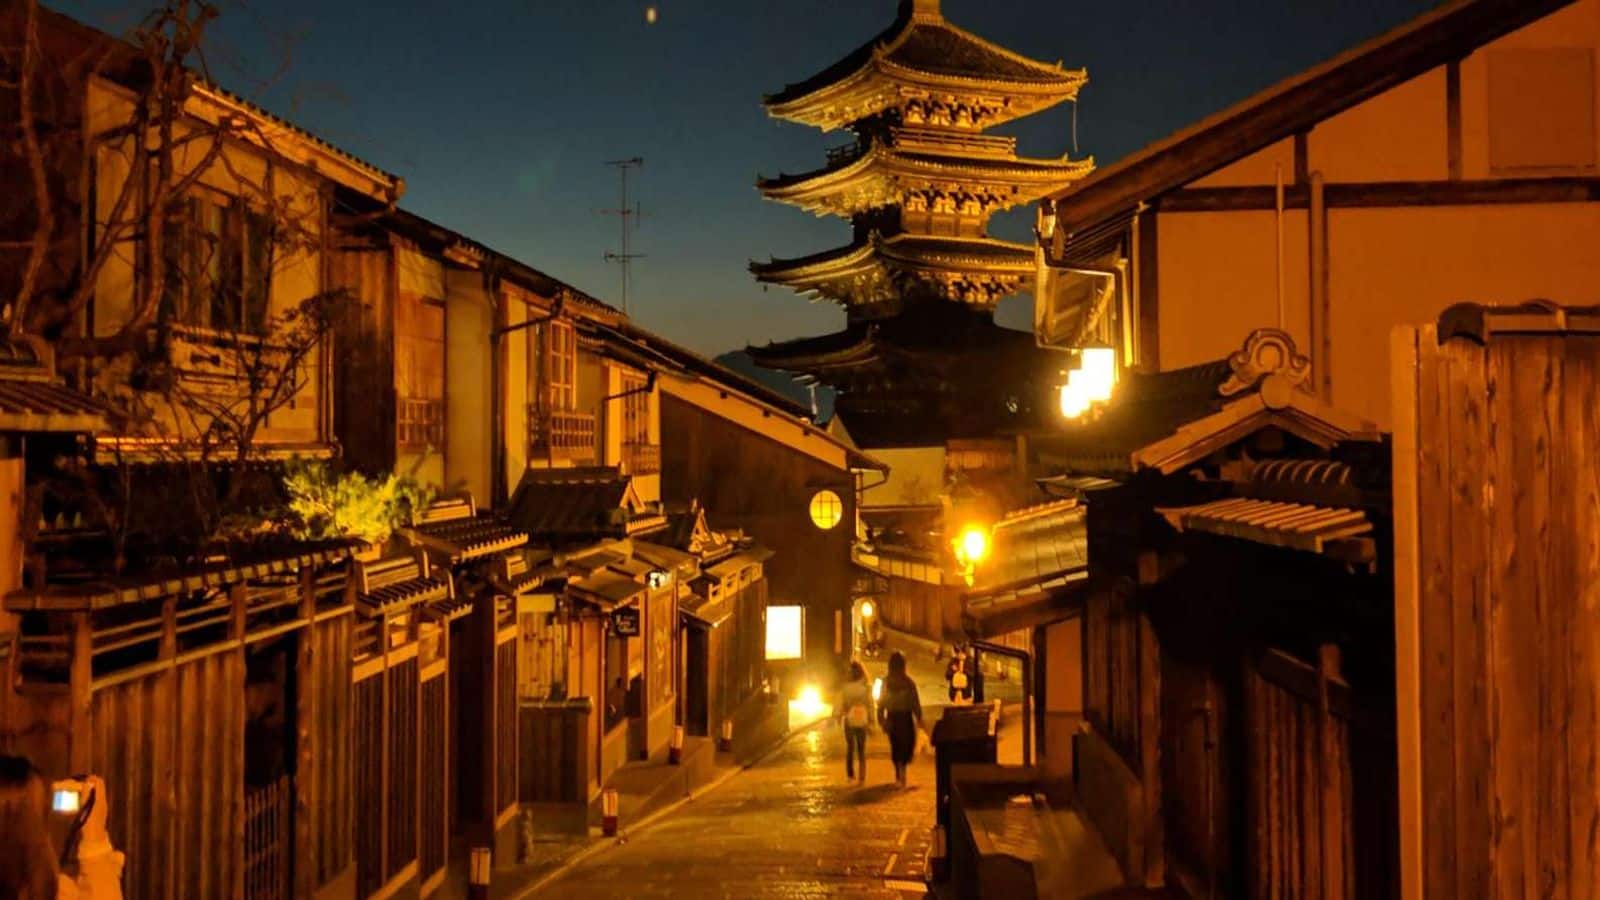 Things to do in Kyoto to while away your evenings